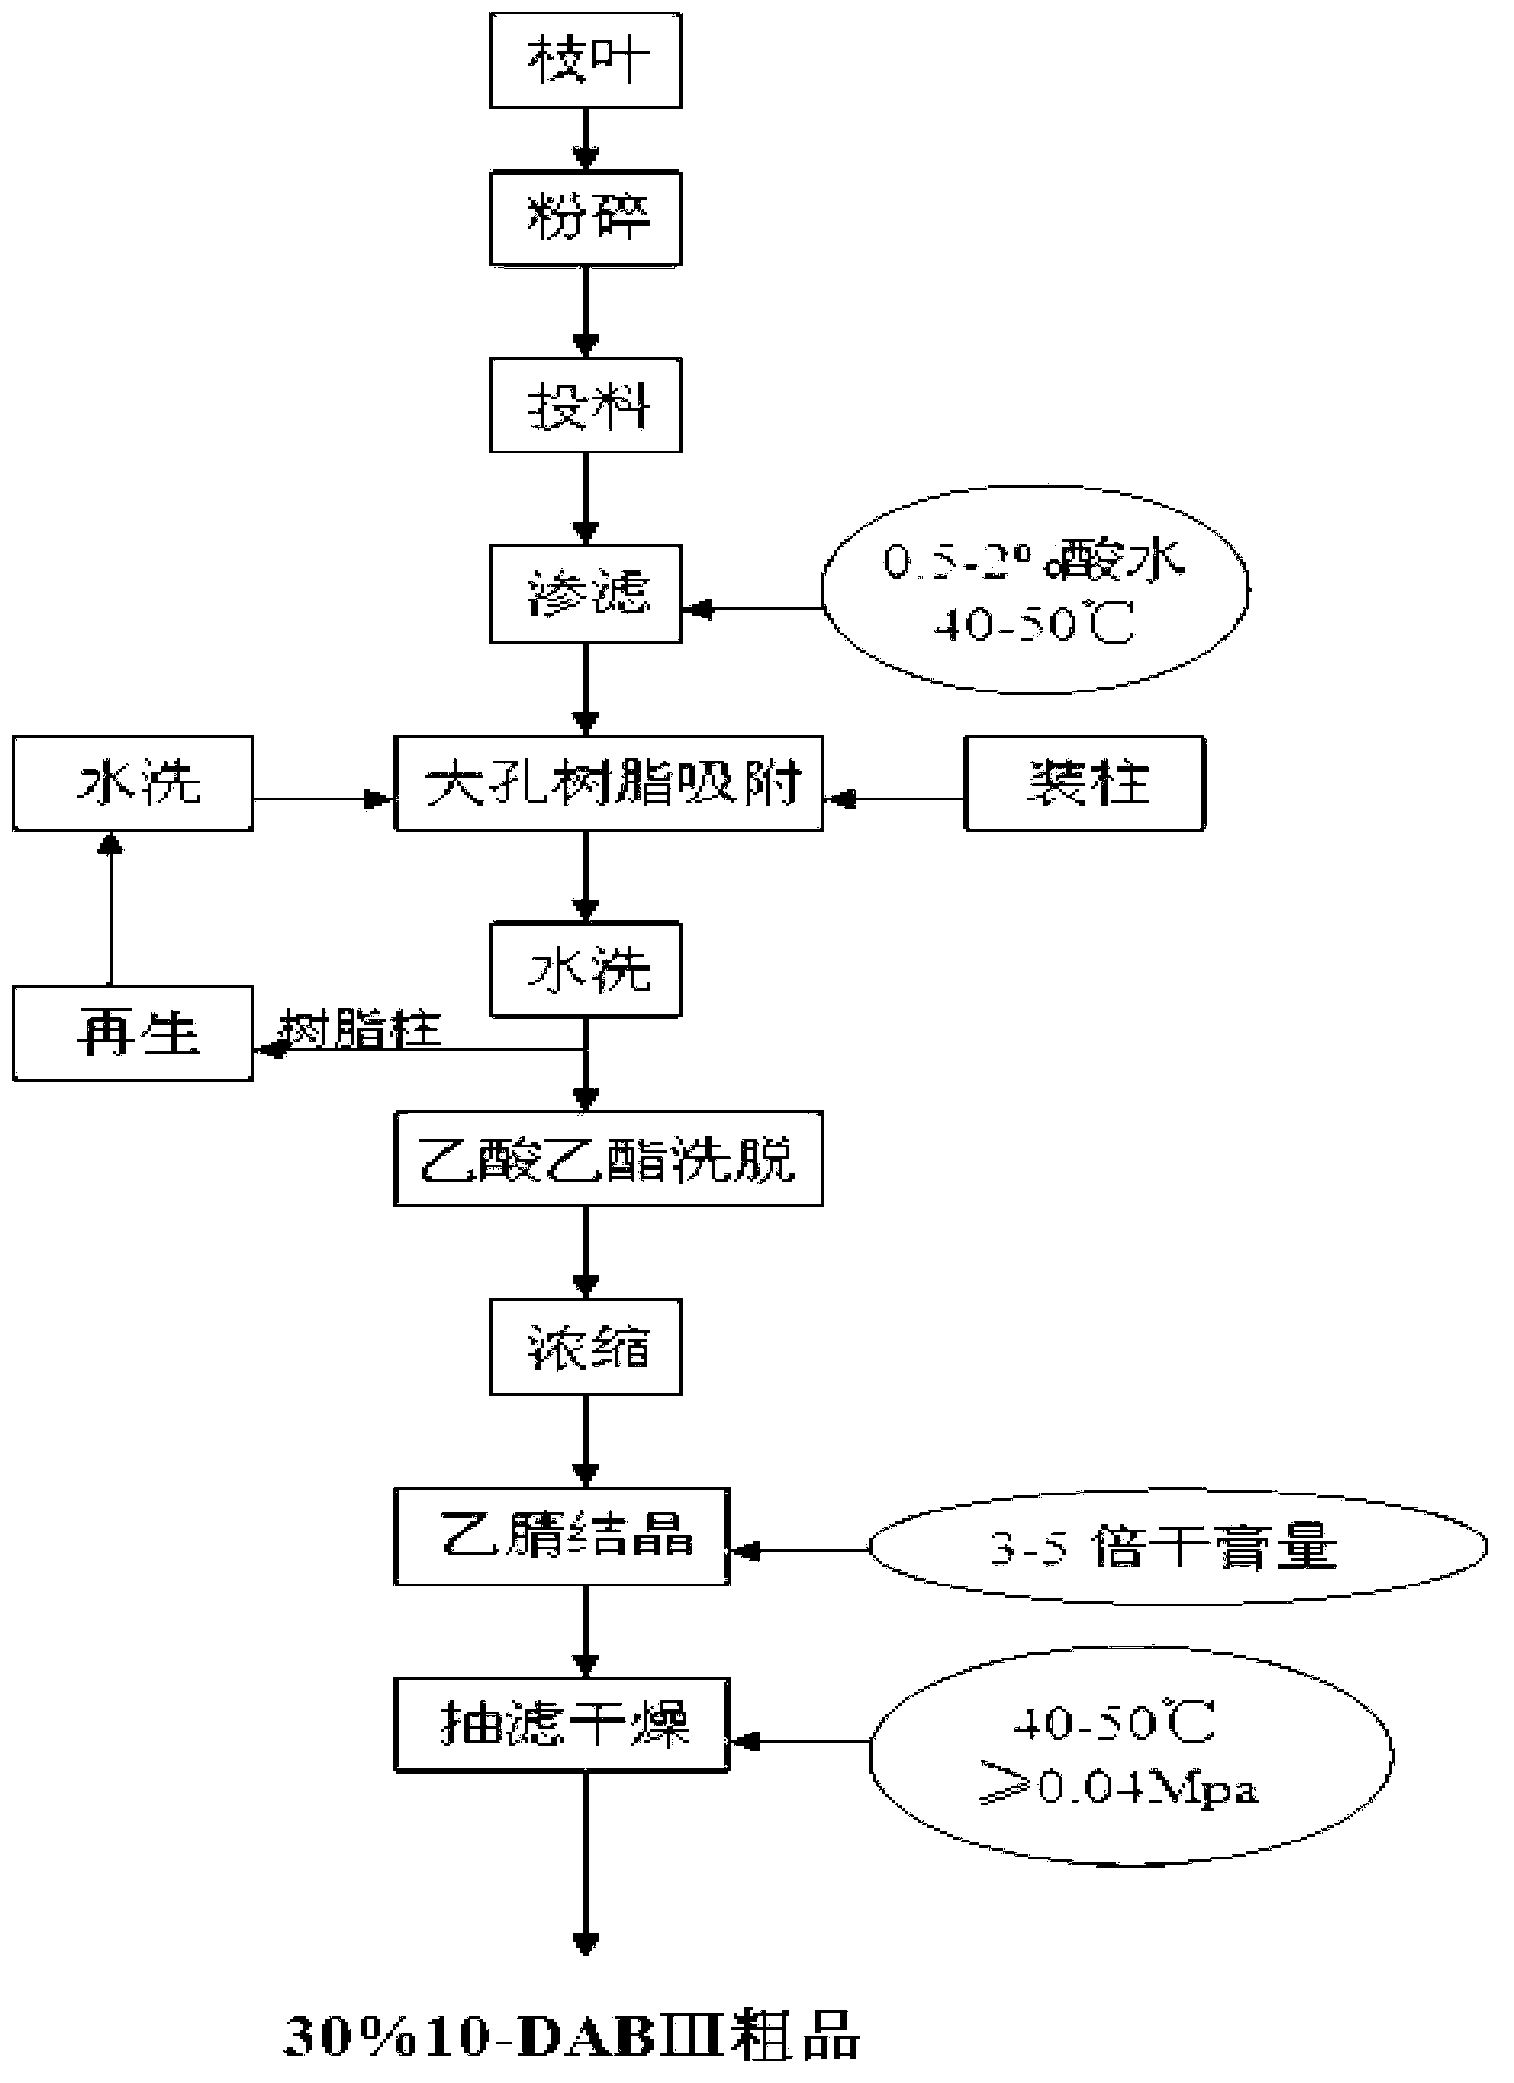 Method for separating and purifying 10-deacetyl baccatin III from Chinese yew branches and leaves